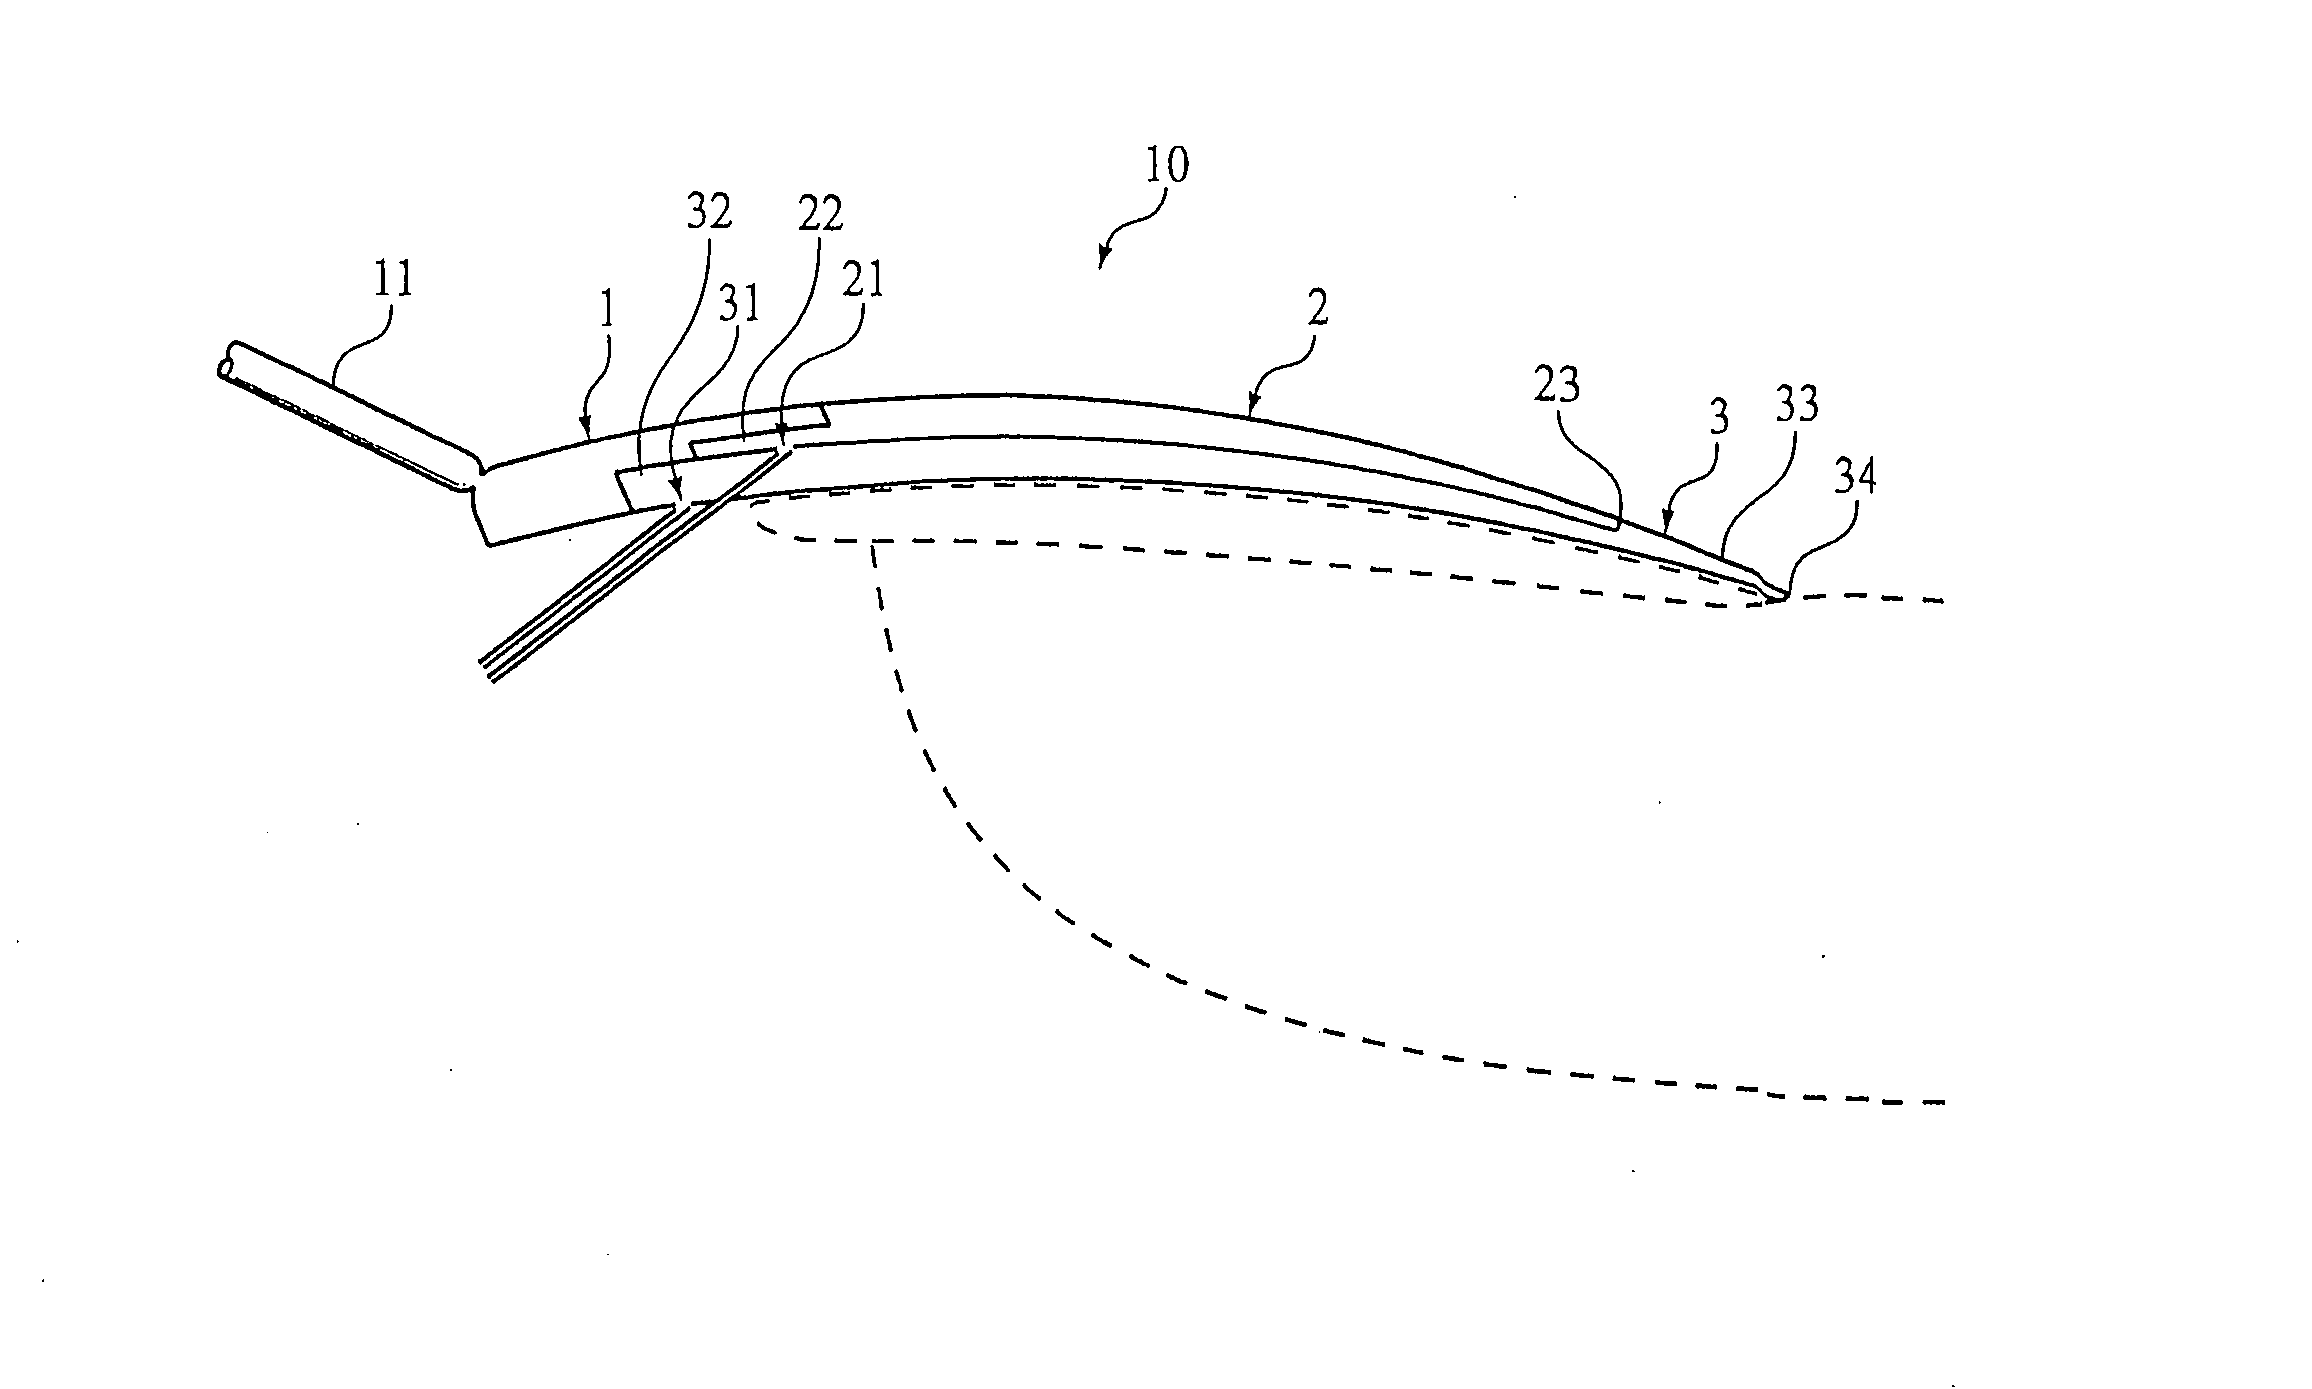 Artificial nail and method of forming same